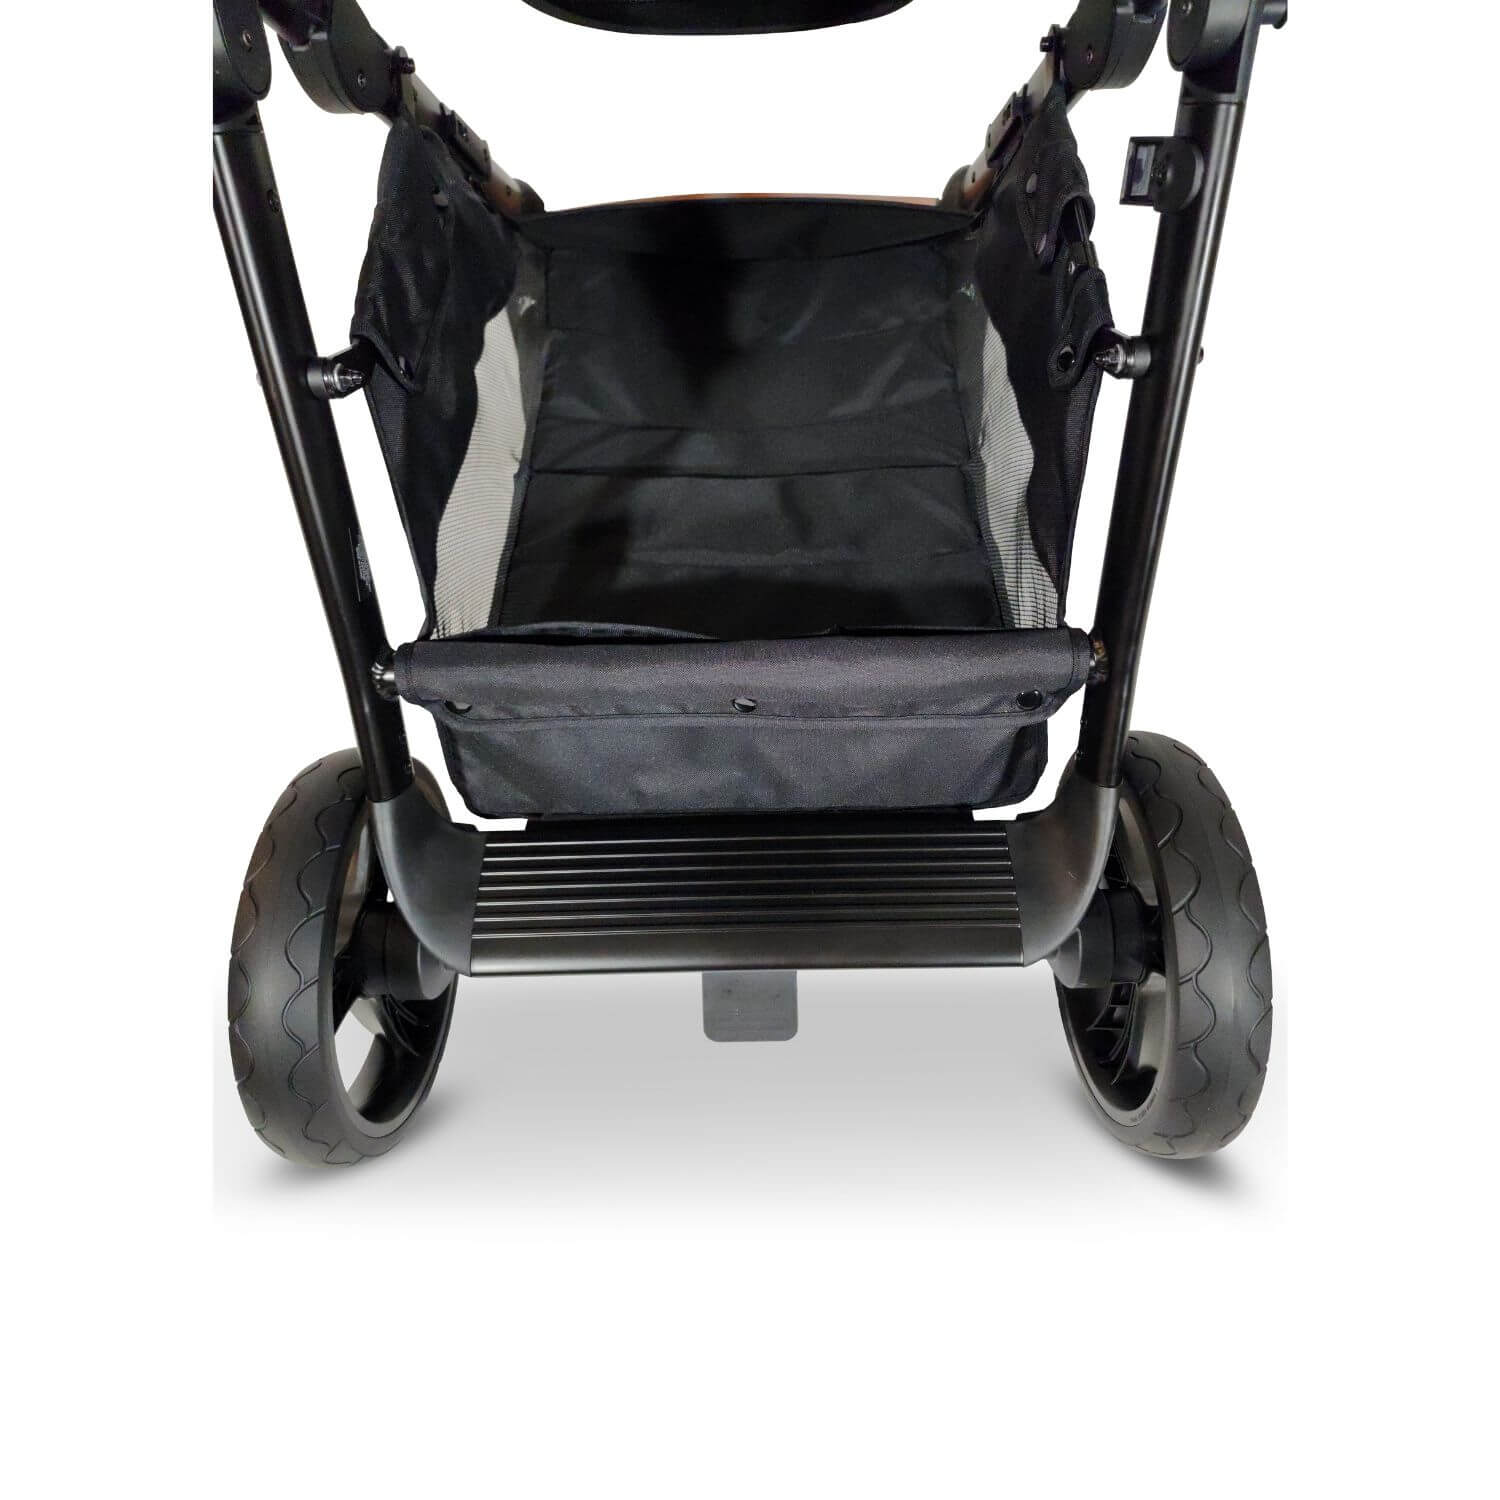 Venice Child Ventura Single to Double Sit-And-Stand Stroller | Shadow - Detail